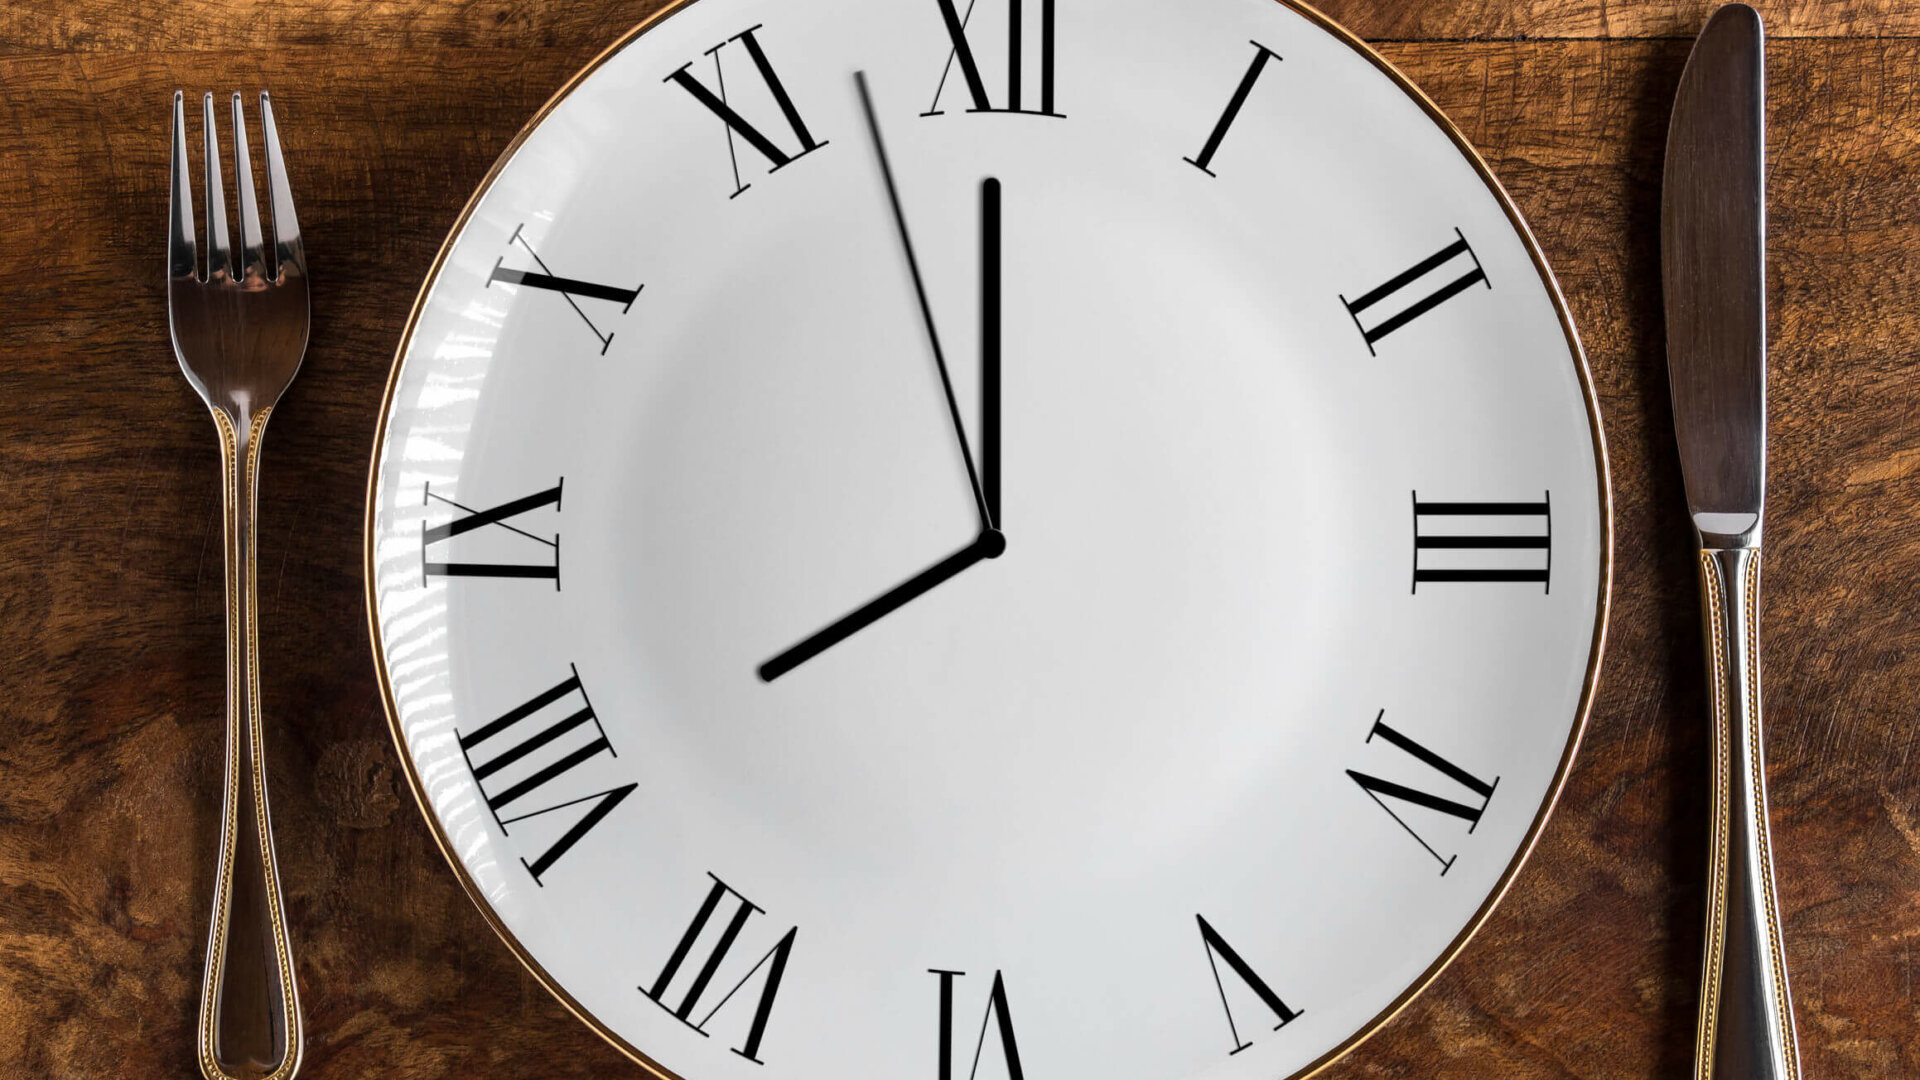 A Primer on Fasting and Time-Restricted Eating